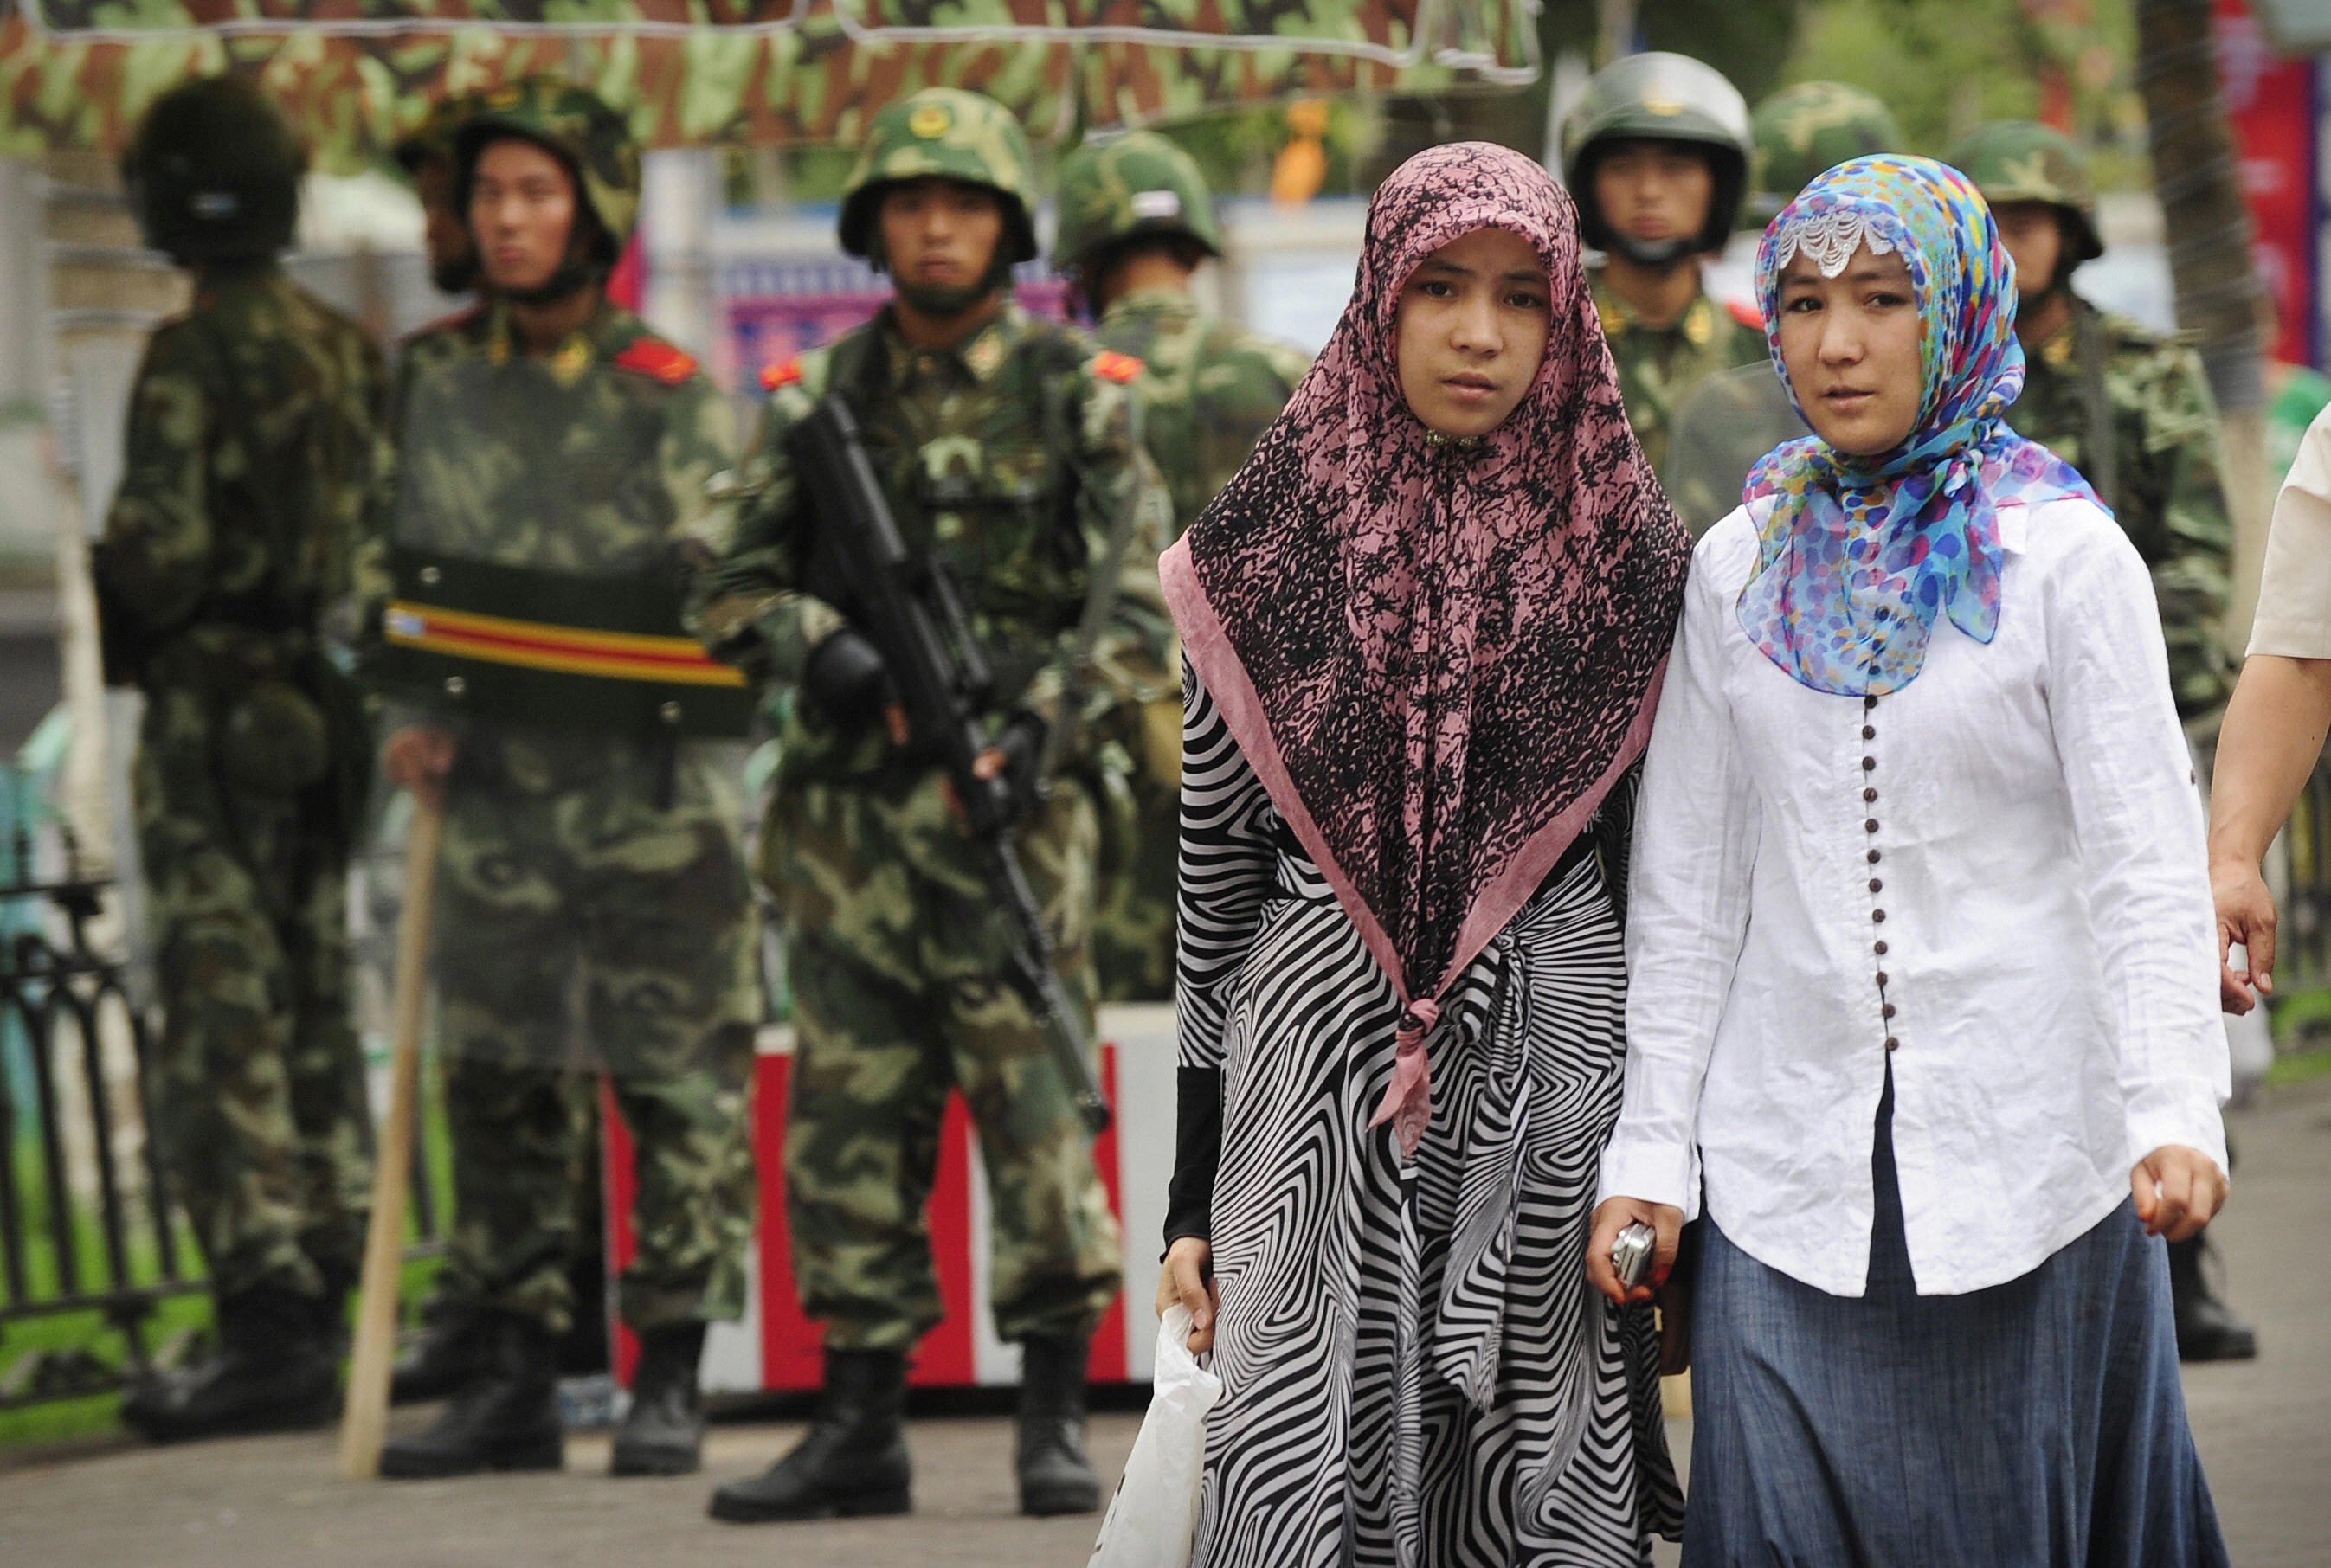 Two ethnic Uighur women pass Chinese paramilitary policemen standing guard outside the Grand Bazaar in the Uighur district of the city of Urumqi in China's Xinjiang region on July 14, 2009. A mosque was closed and many businesses were shuttered a day after police shot dead two Muslim Uighurs, as ethnic tensions simmered in restive Urumqi. (PETER PARKS/AFP/Getty Images)